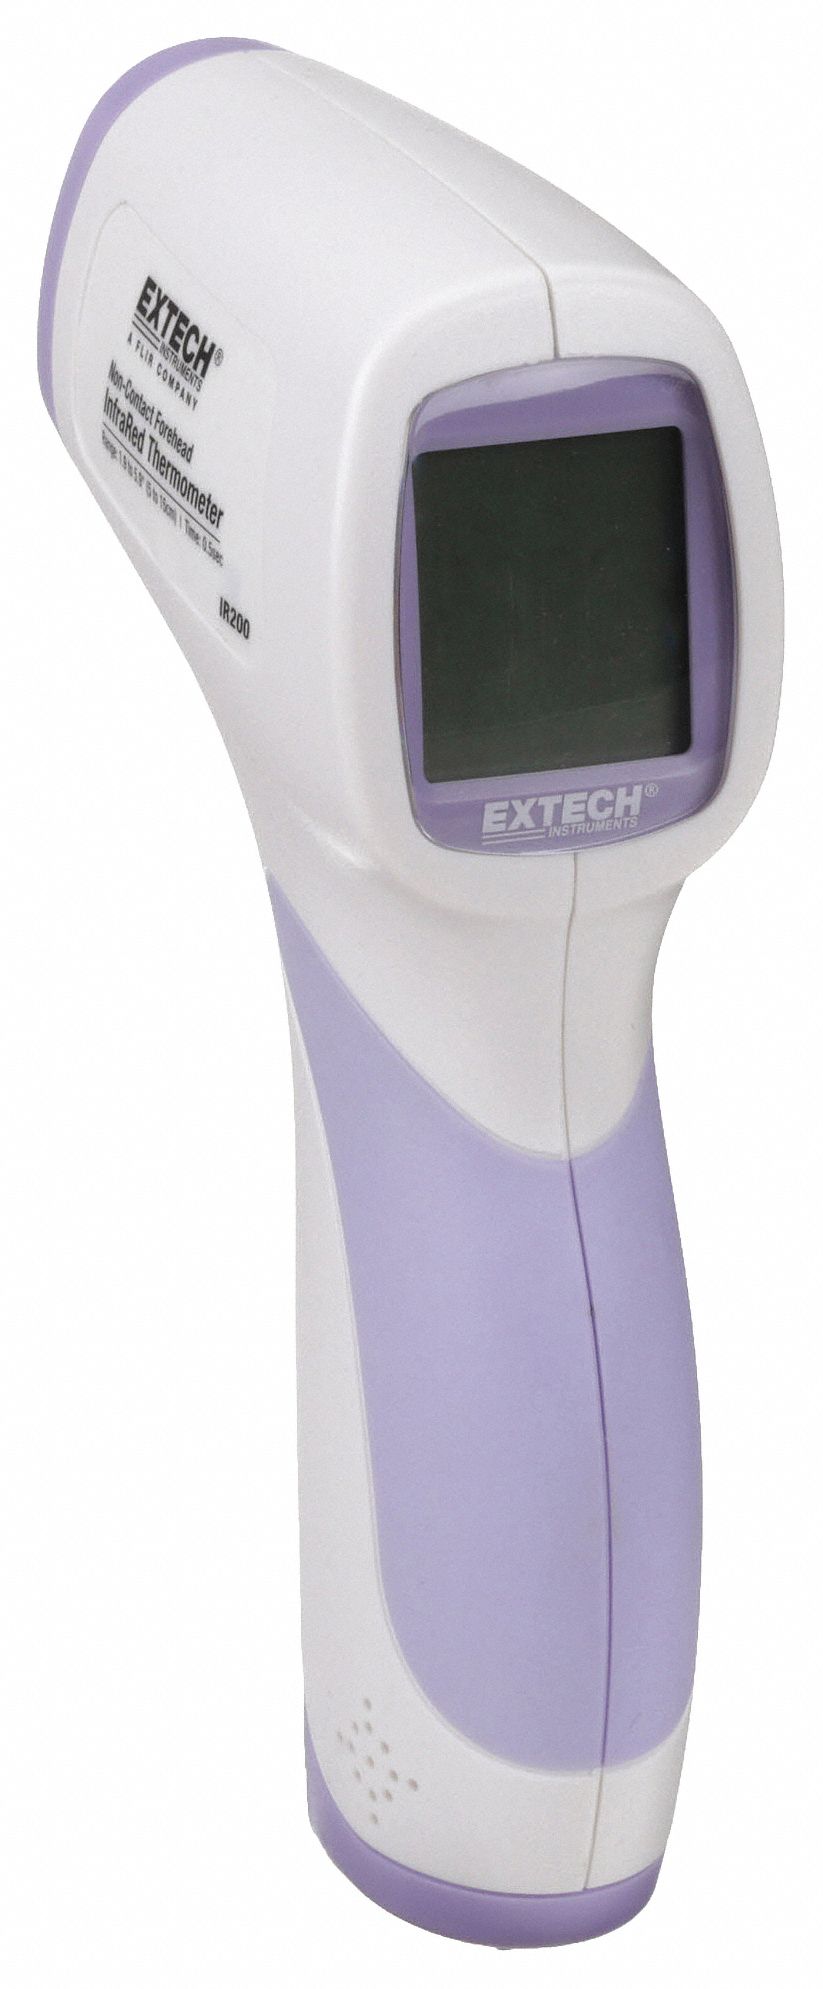 Extech (FLIR) Non-Contact IR Body and Forehead Thermometer